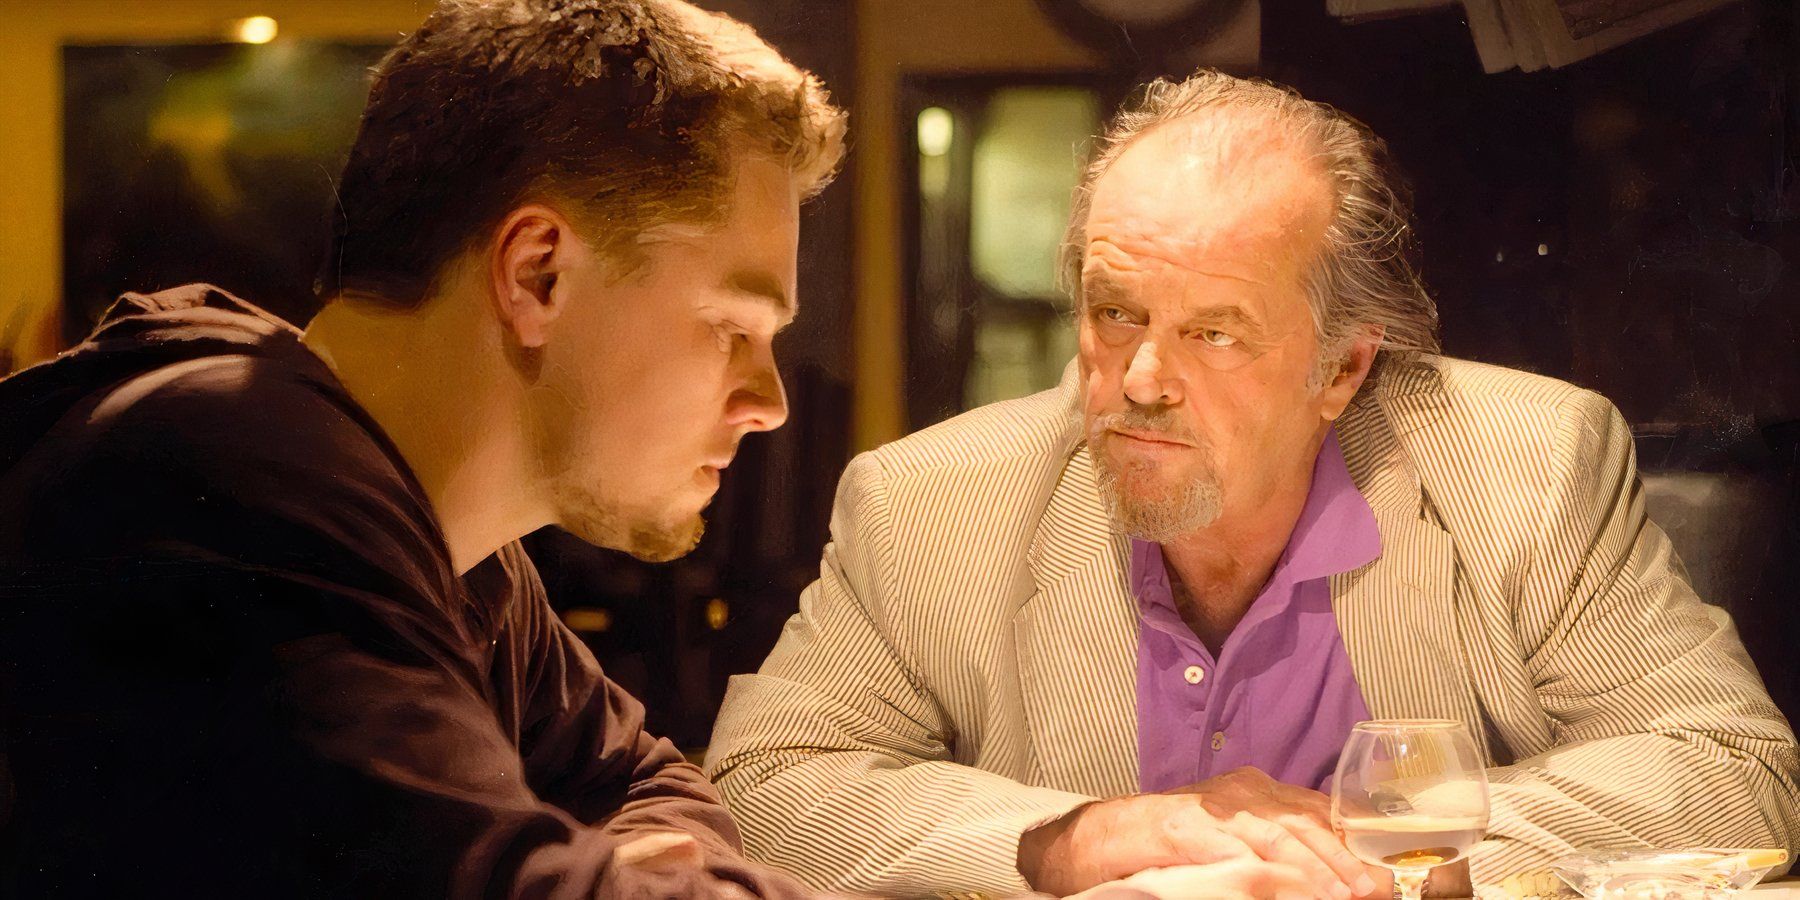 William Costigan Jr. shares a tense conversation with mob boss Frank Costello in The Departed.